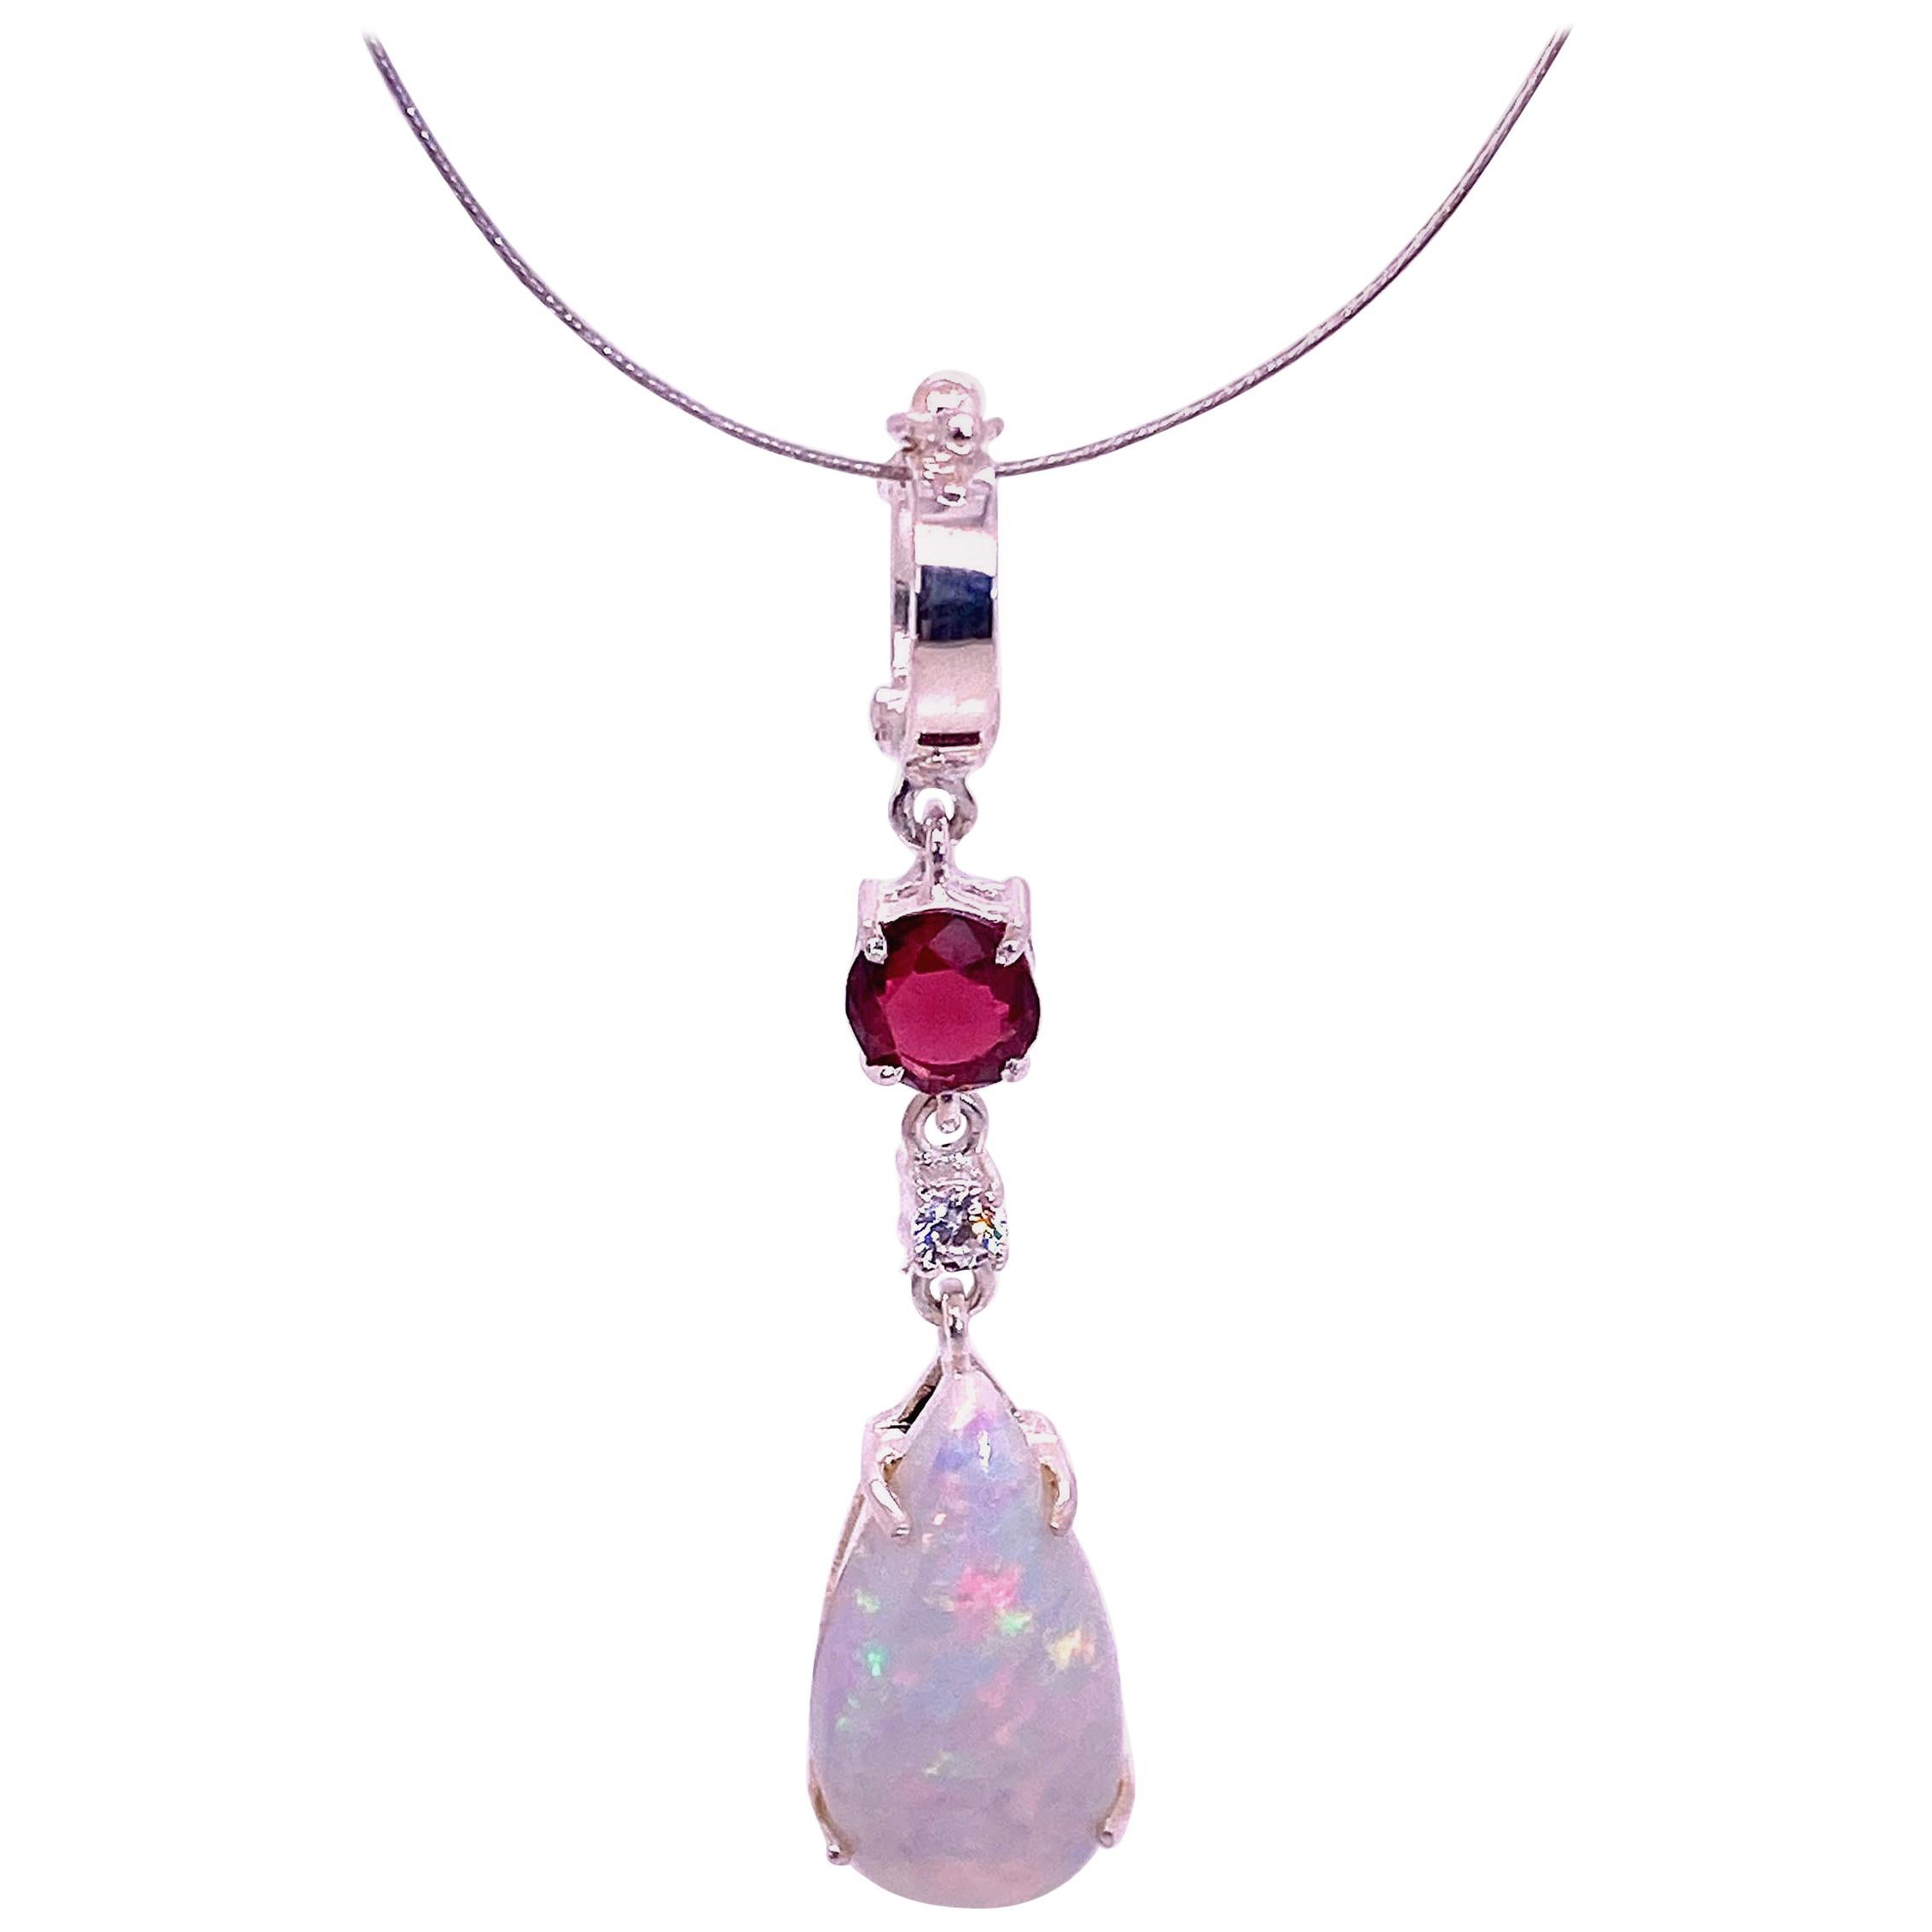 AJD Sparkling Opal Pendant with Accents of Garnet and Zircon For Sale